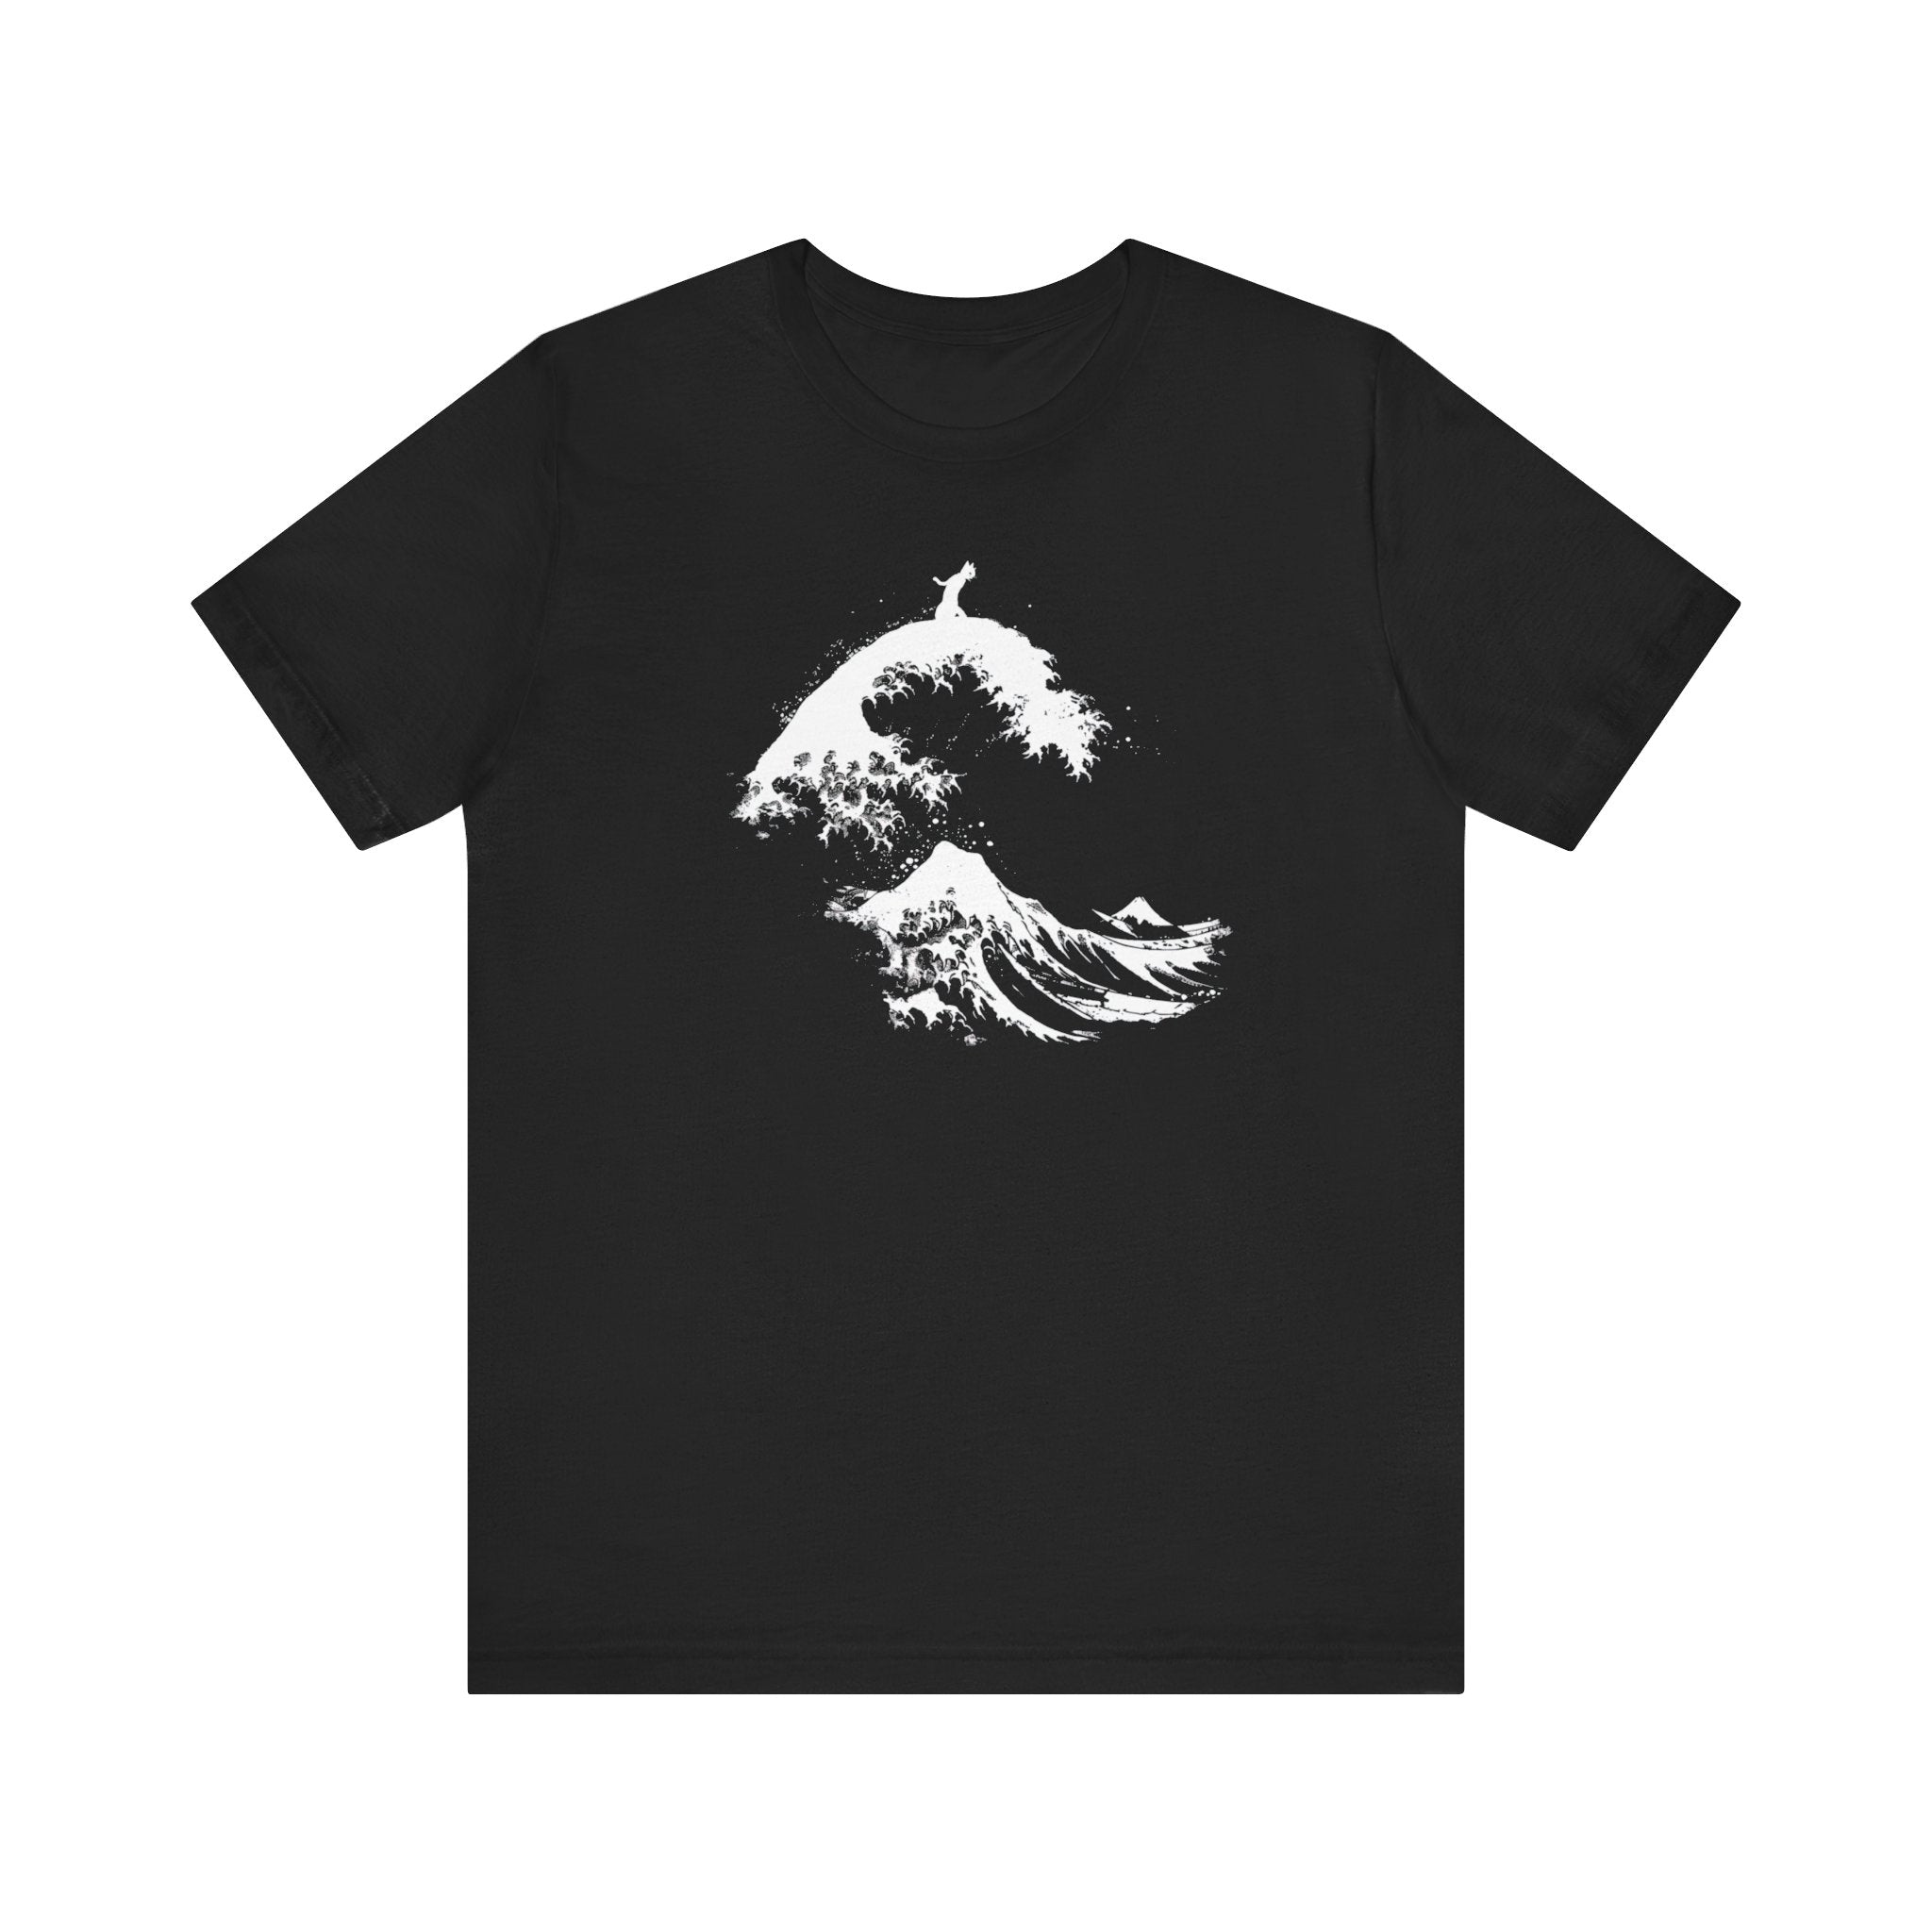 Cat in Japanese Wave Graphic Tee